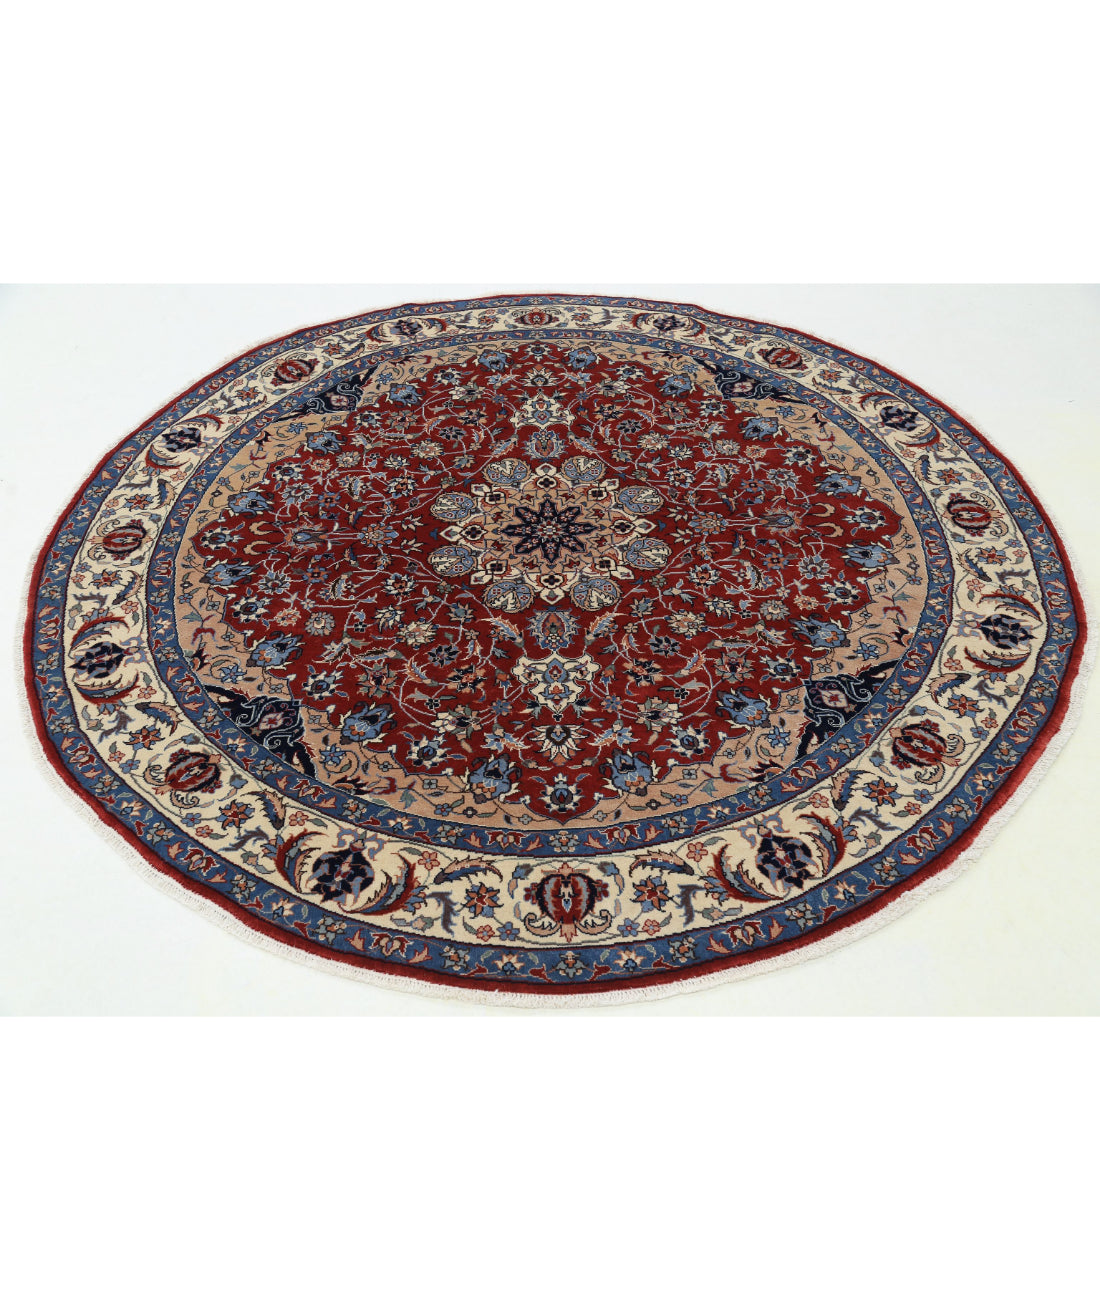 Hand Knotted Heritage Persian Style Wool Rug - 6'5'' x 6'6'' 6'5'' x 6'6'' (193 X 195) / Red / Ivory